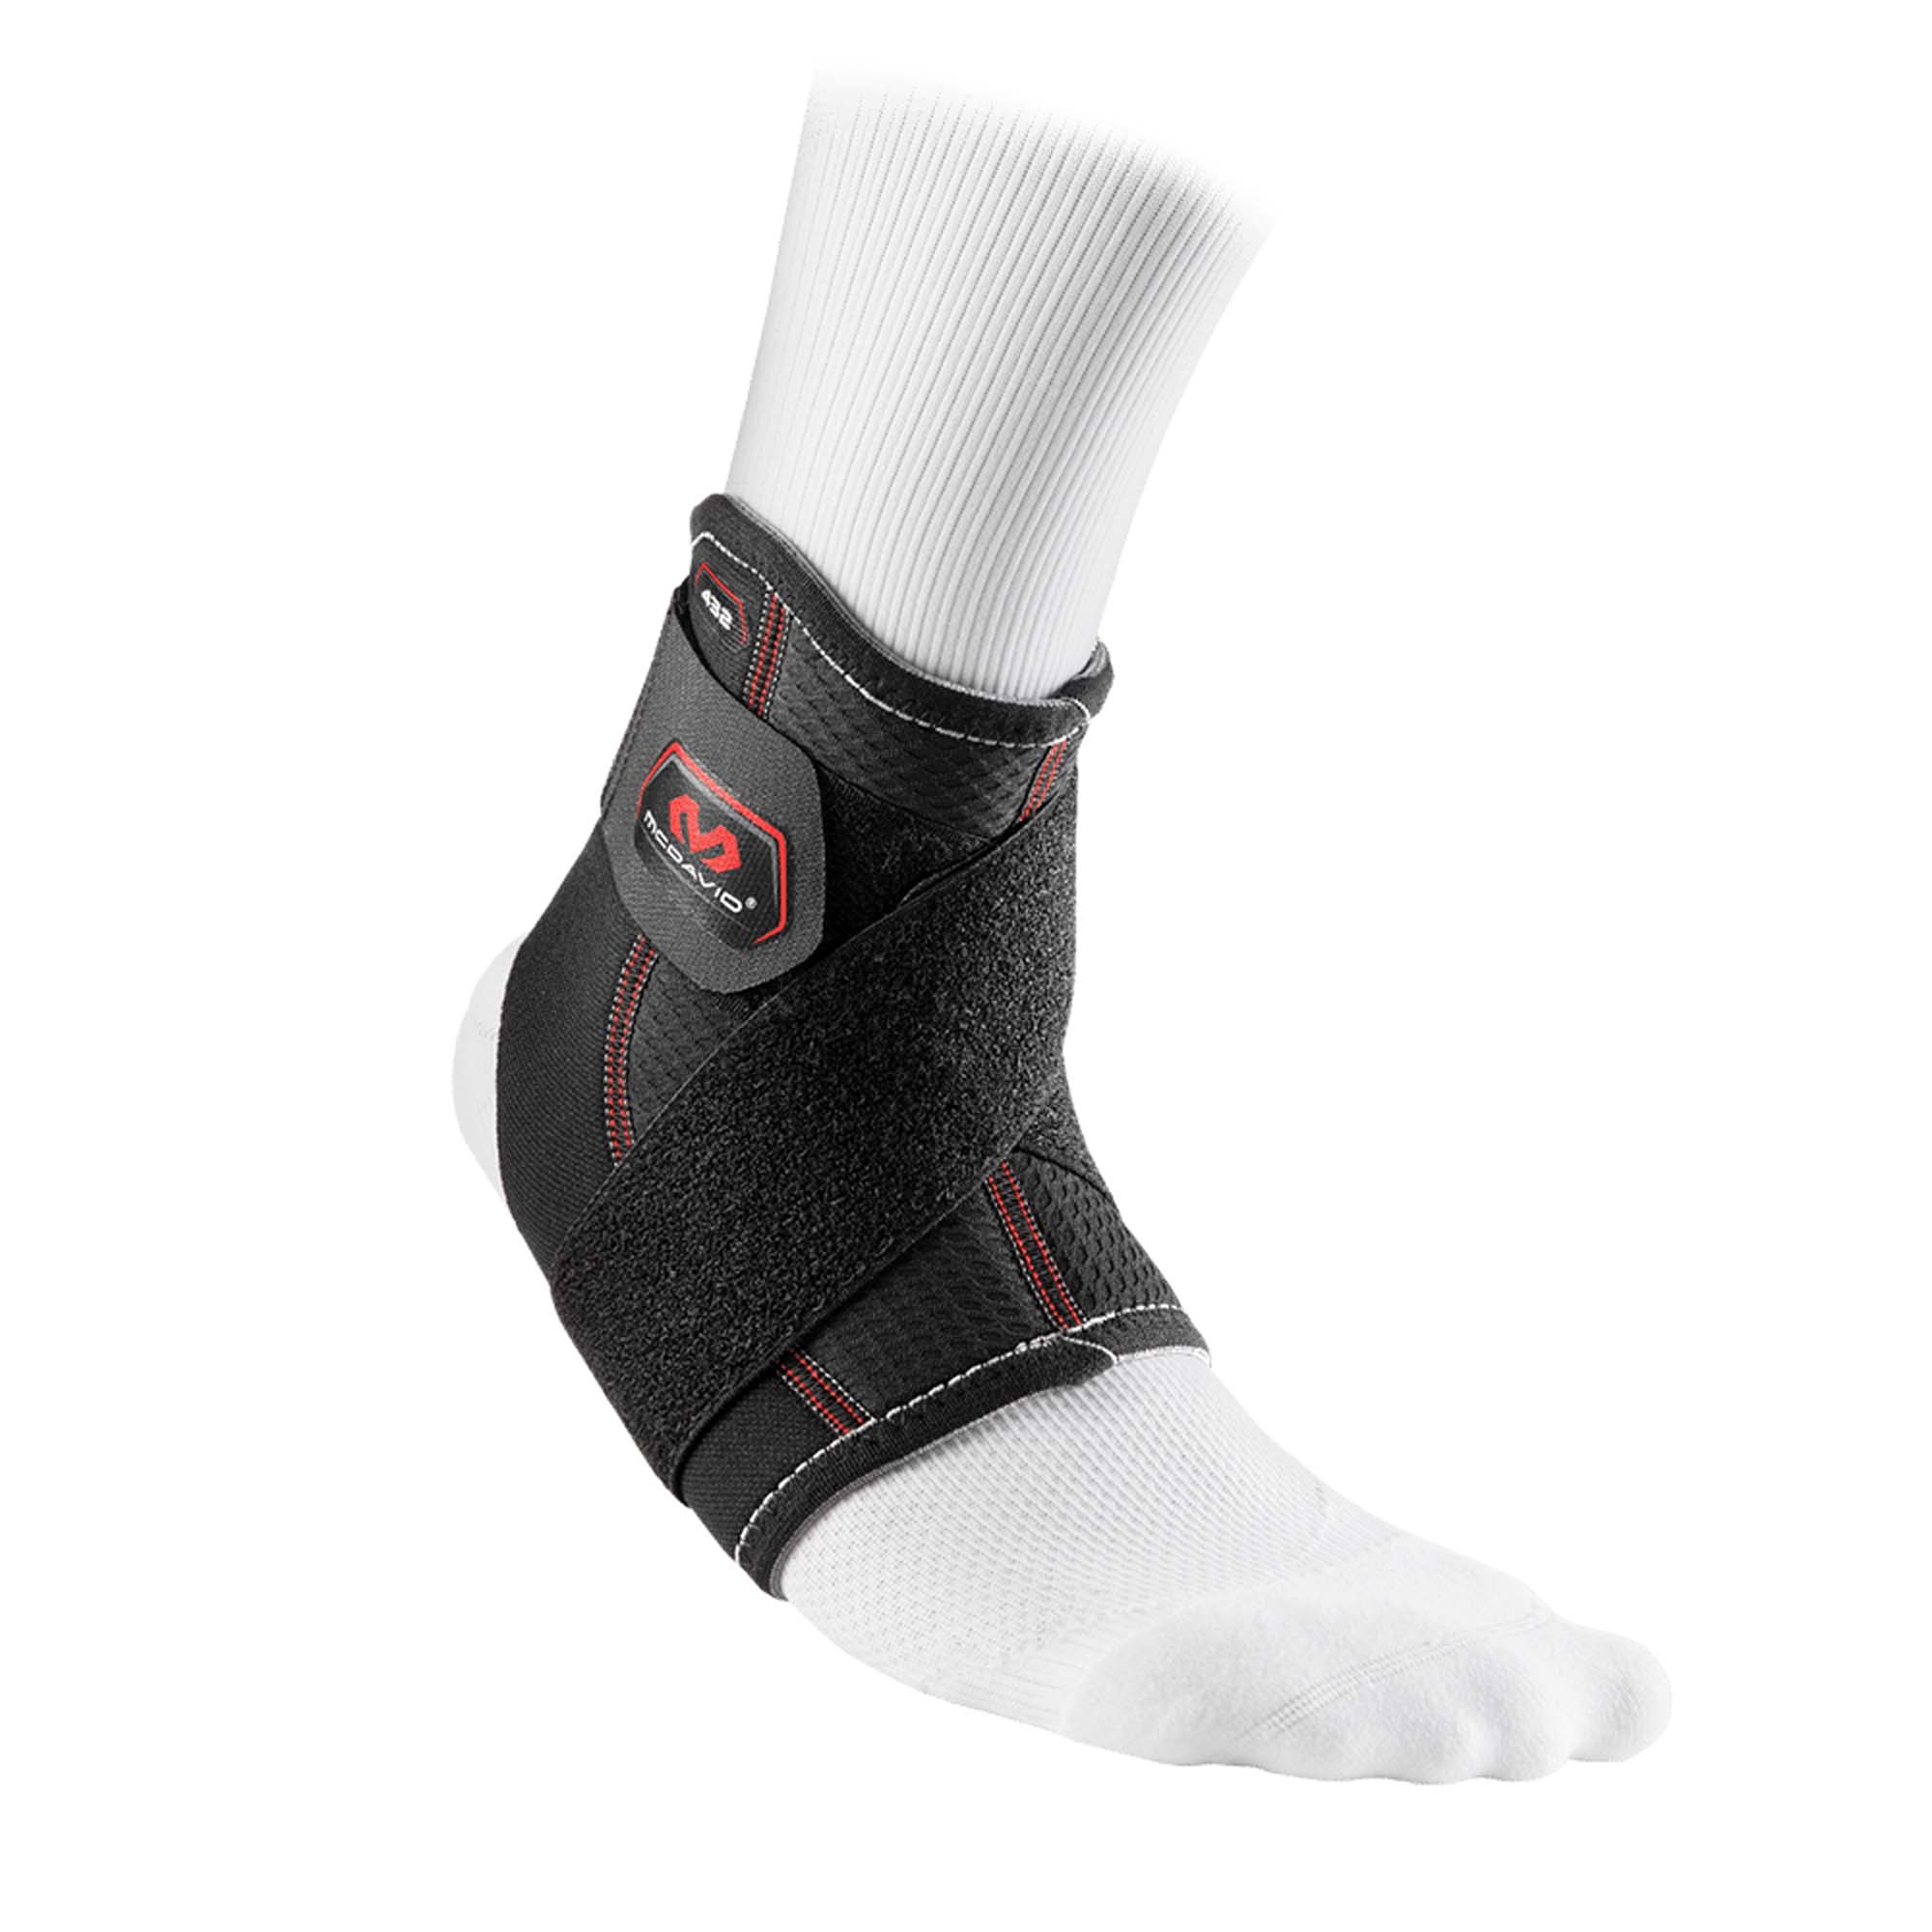 mcdavid ankle support w strap